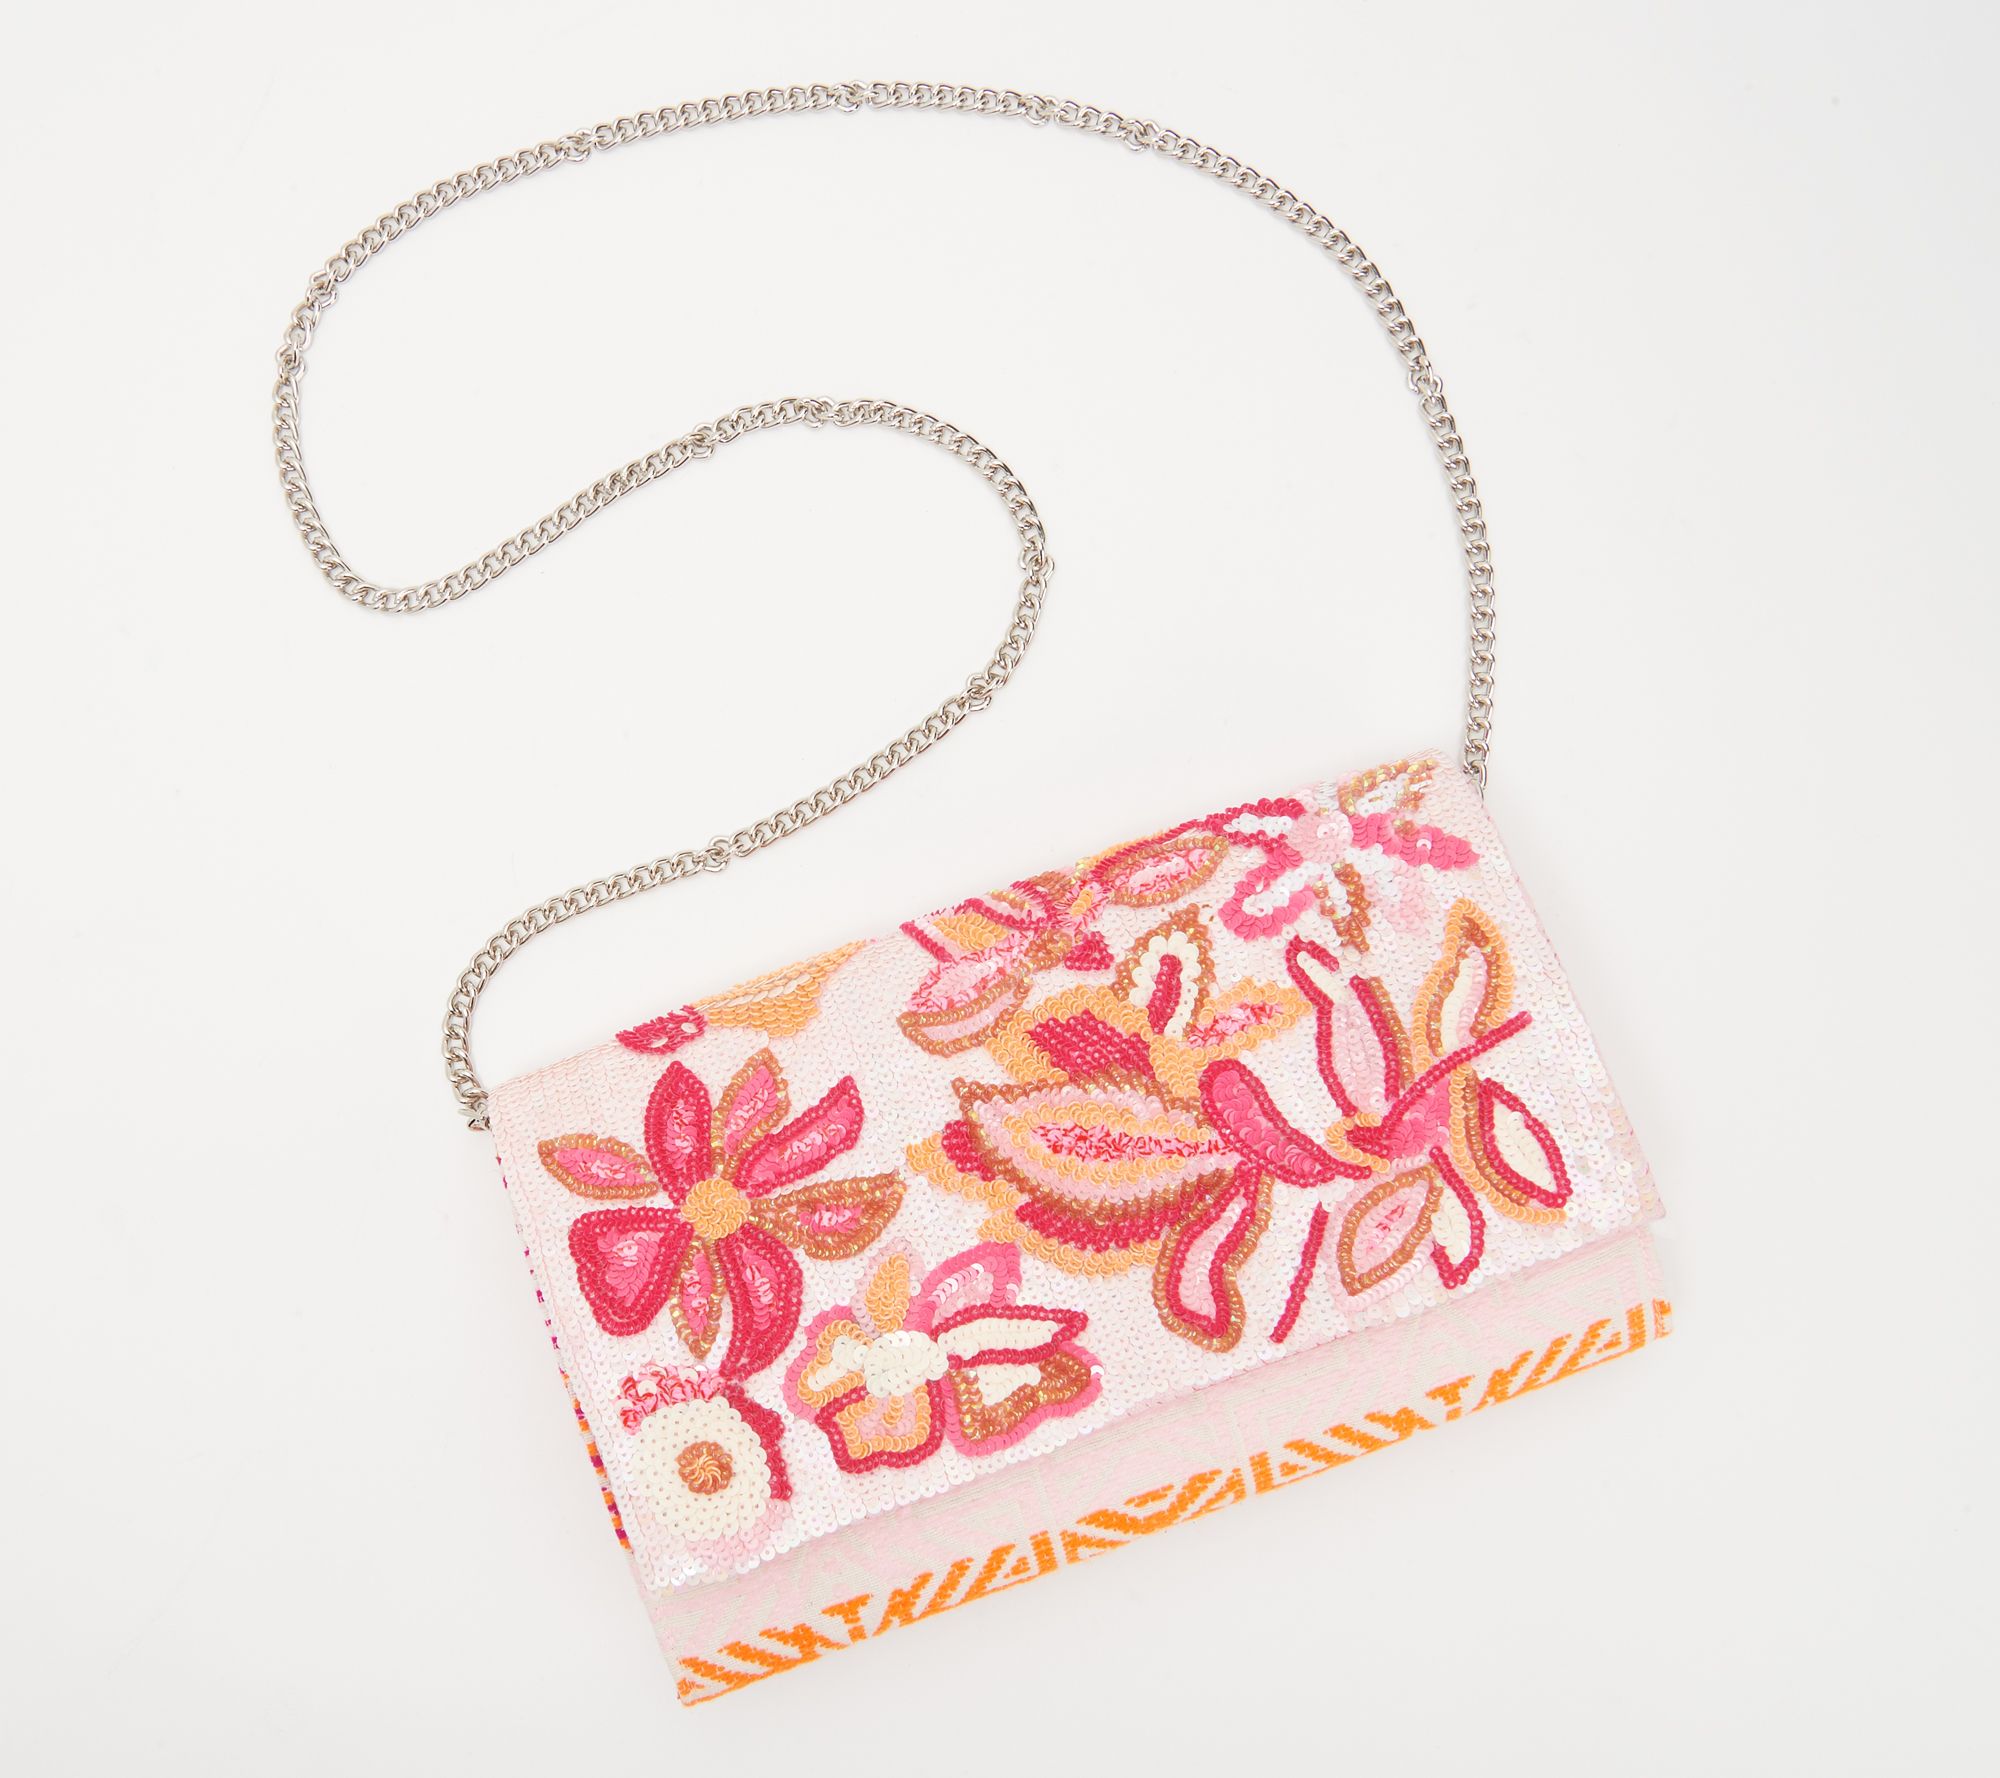 America and Beyond Embellished Convertible Clutch w/ Strap - QVC.com